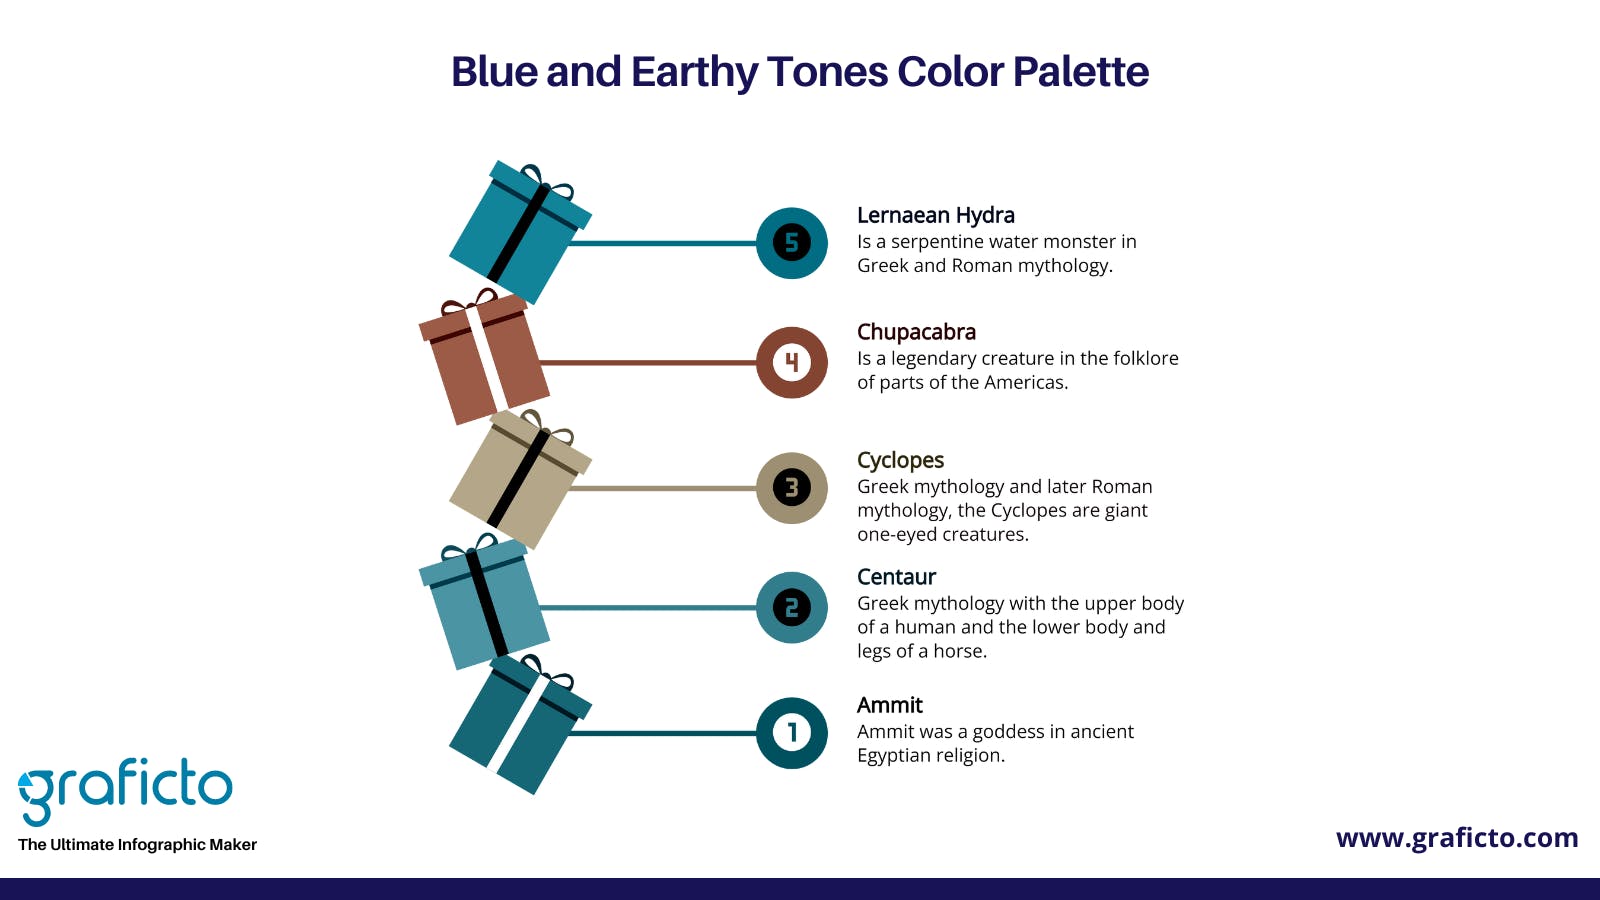 Blue and Earthy Tones graficto Christmas Color Palettes